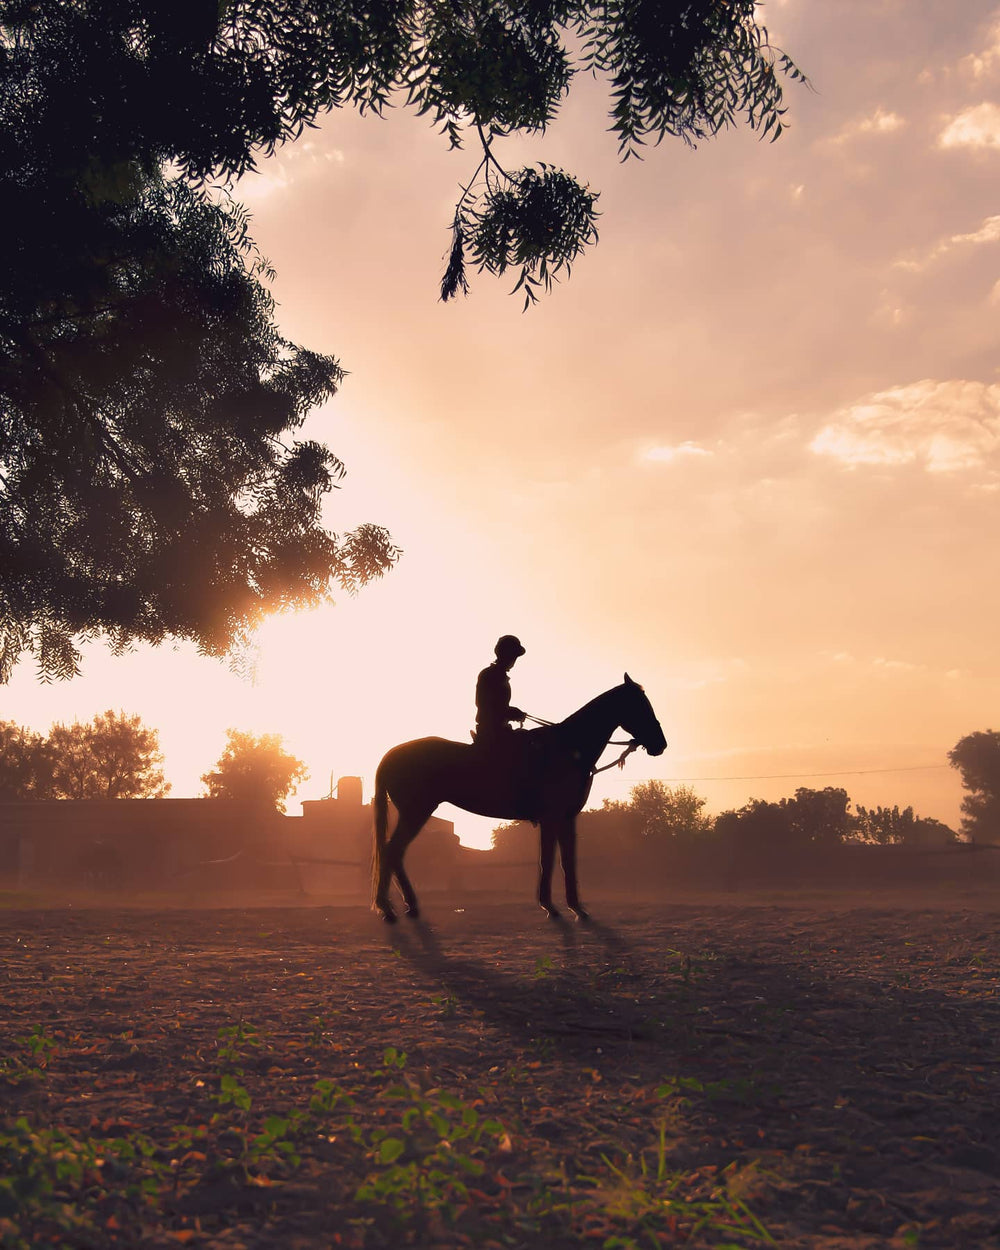 person silhouetted on a horse in a open field